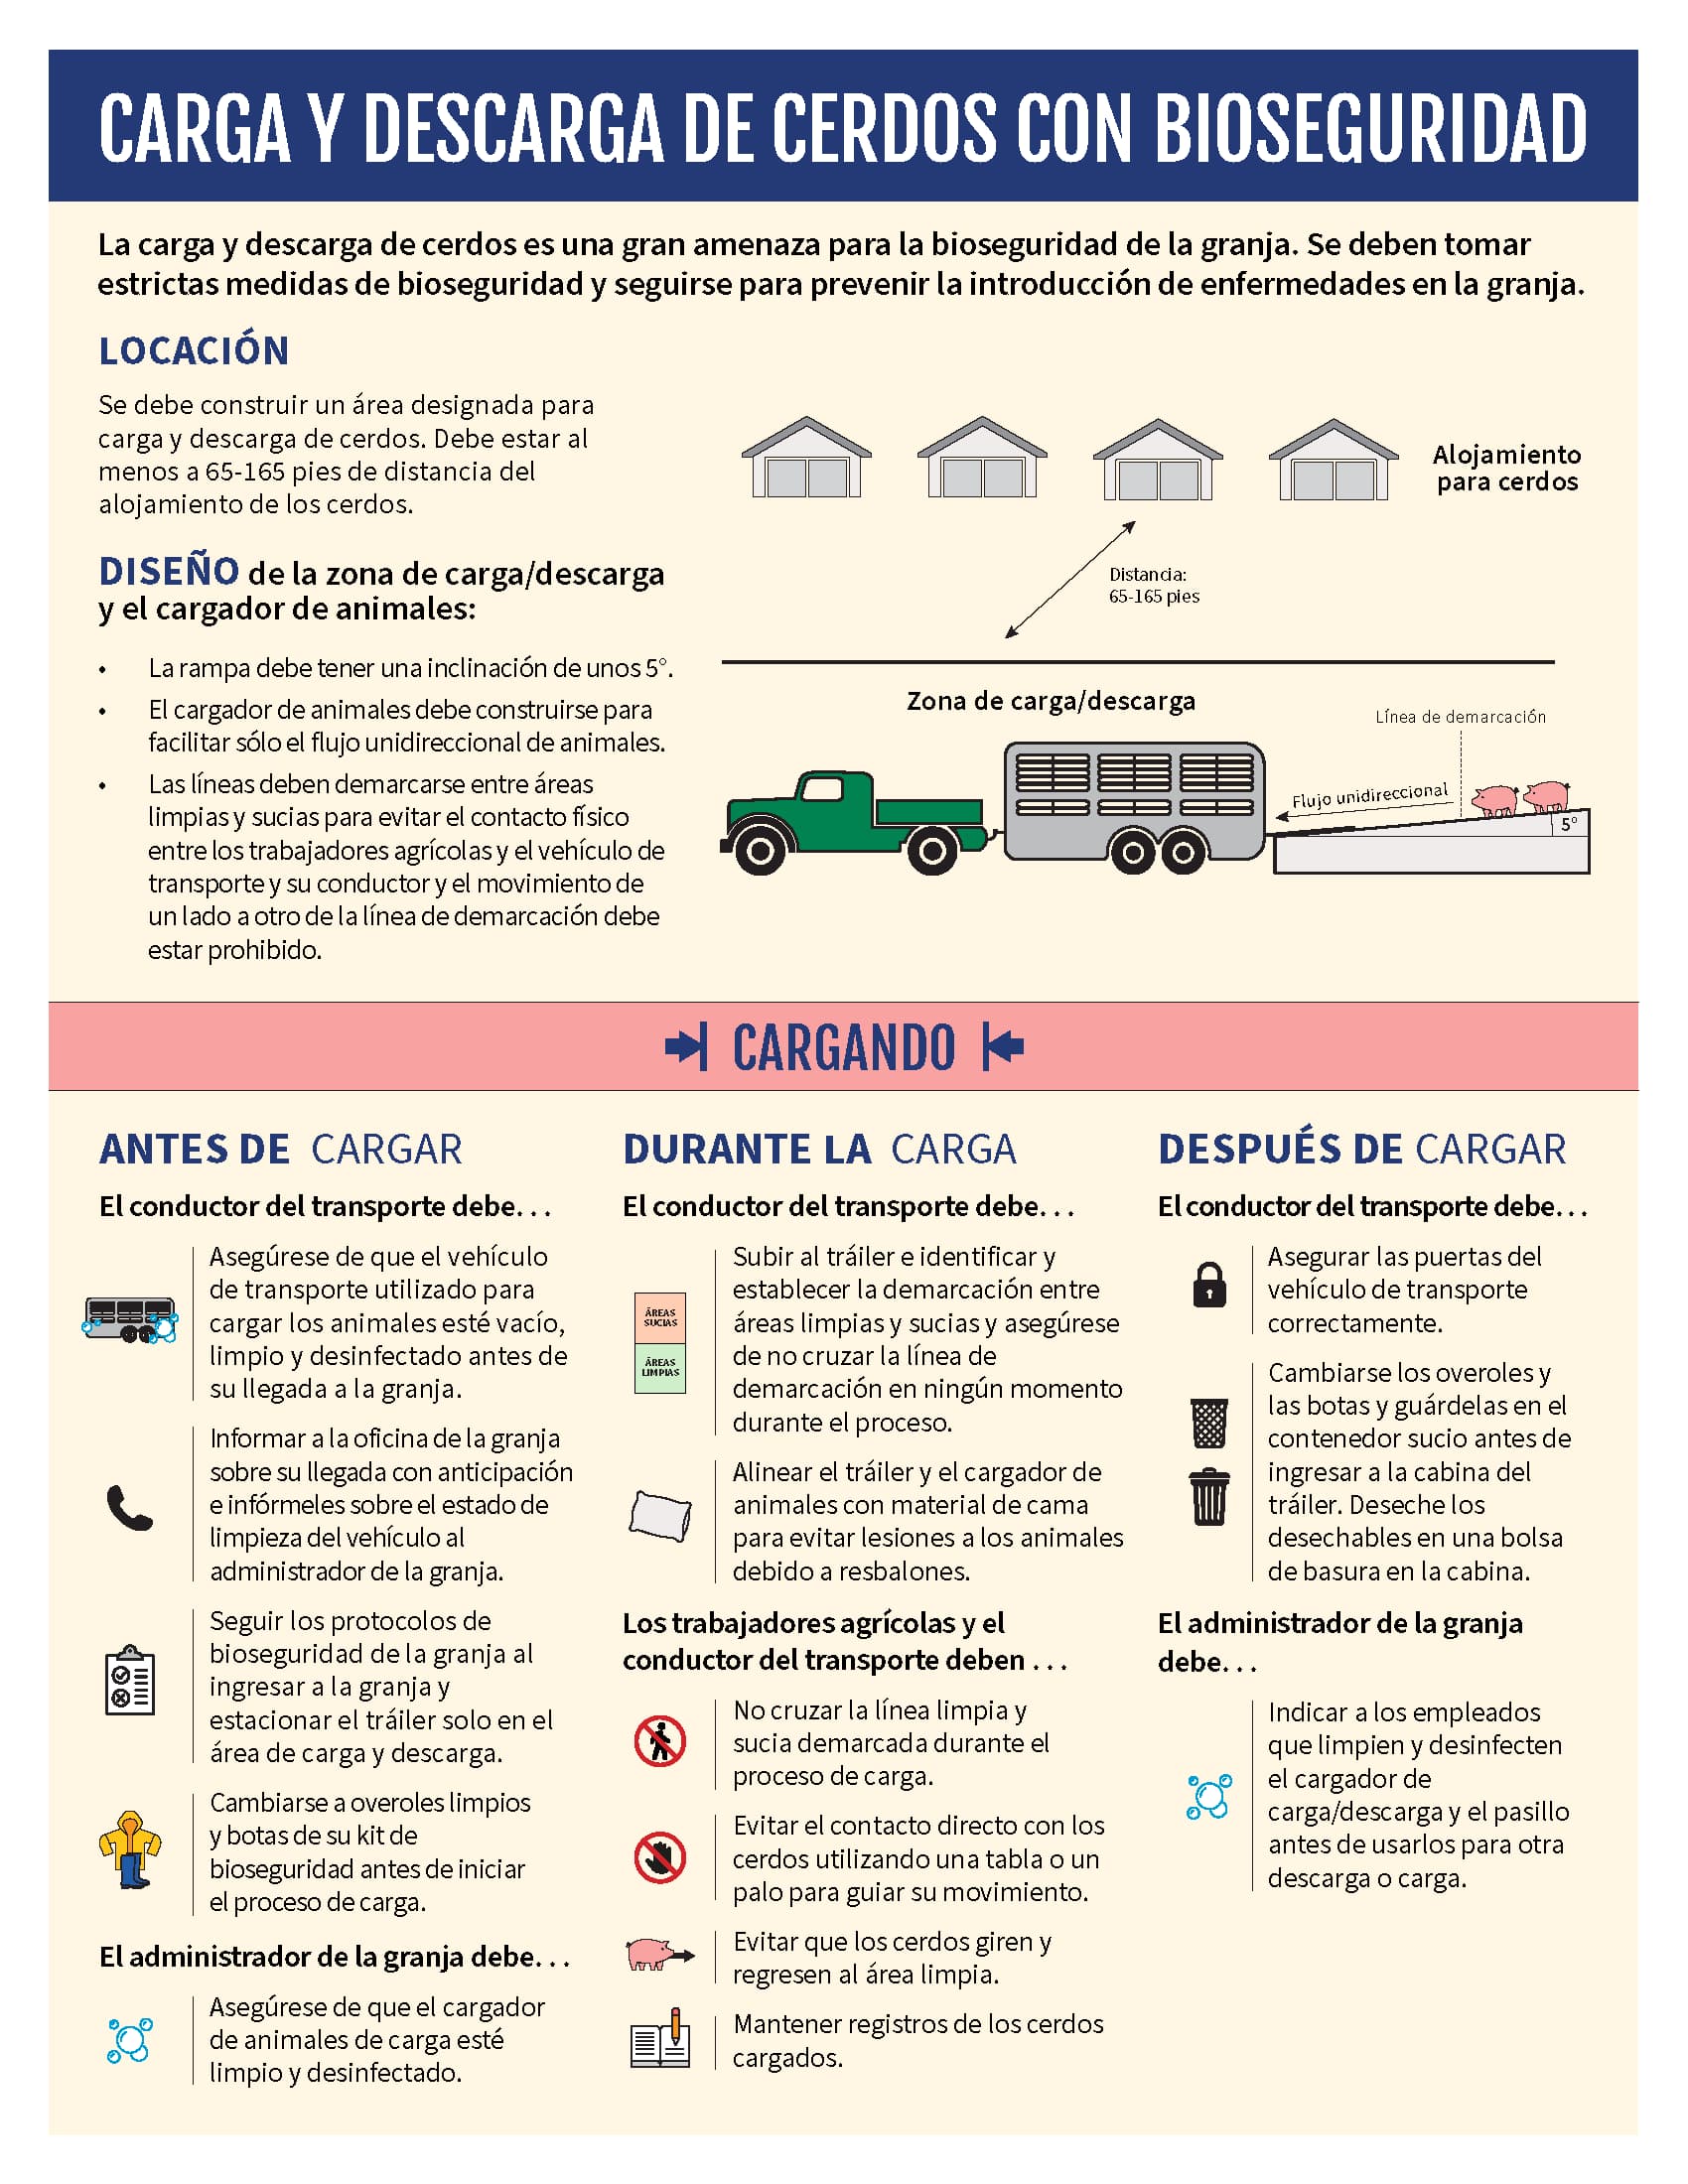 Load and unload pigs biosecurely page 1-Spanish: pdf download